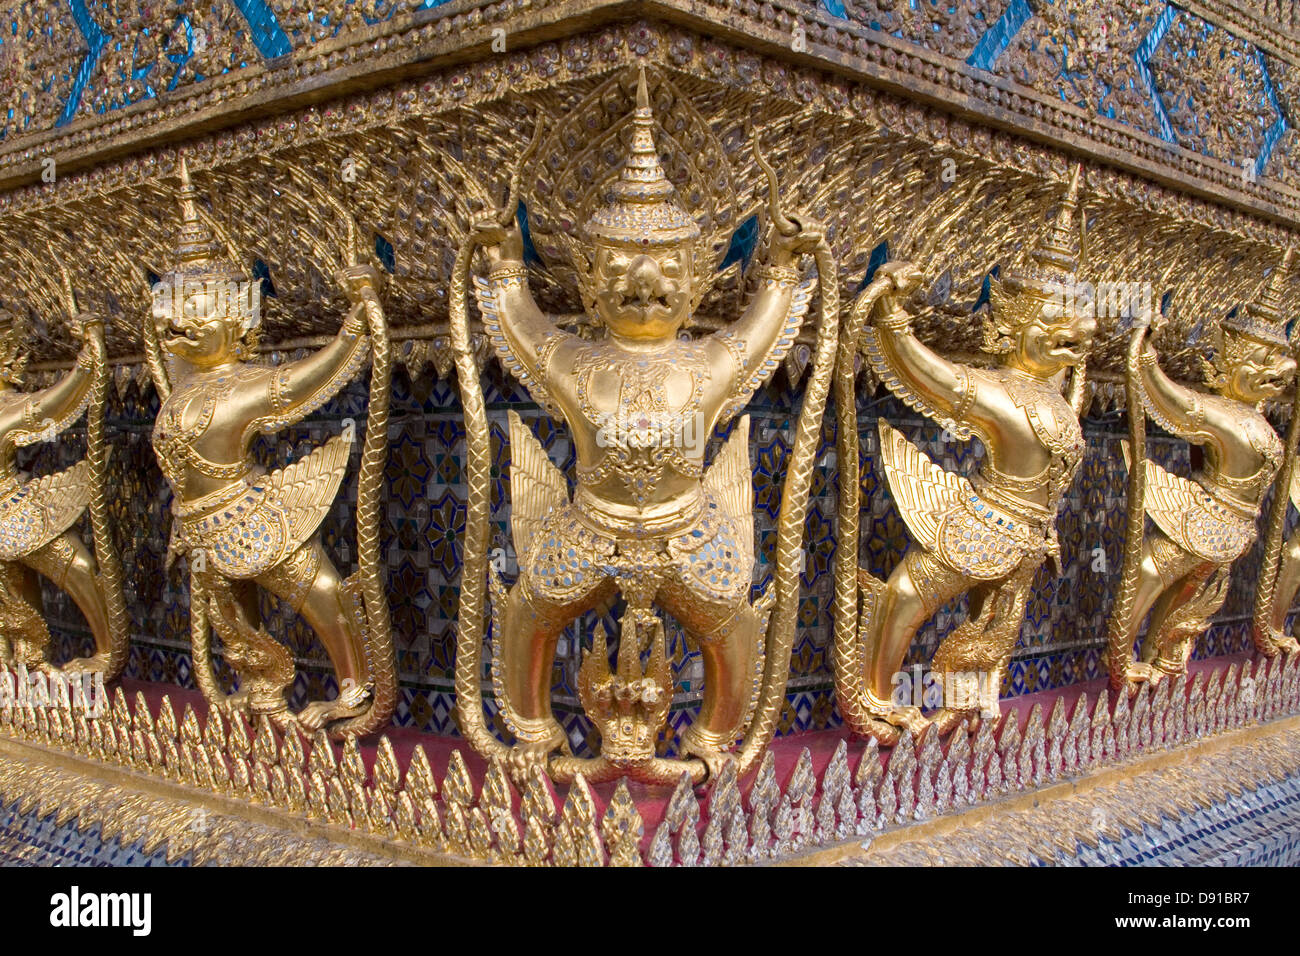 Decoration on the outer walls of the Temple of the Emerald Buddha, or Wat Phra Gaeo, Bangkok, Thailand. Stock Photo